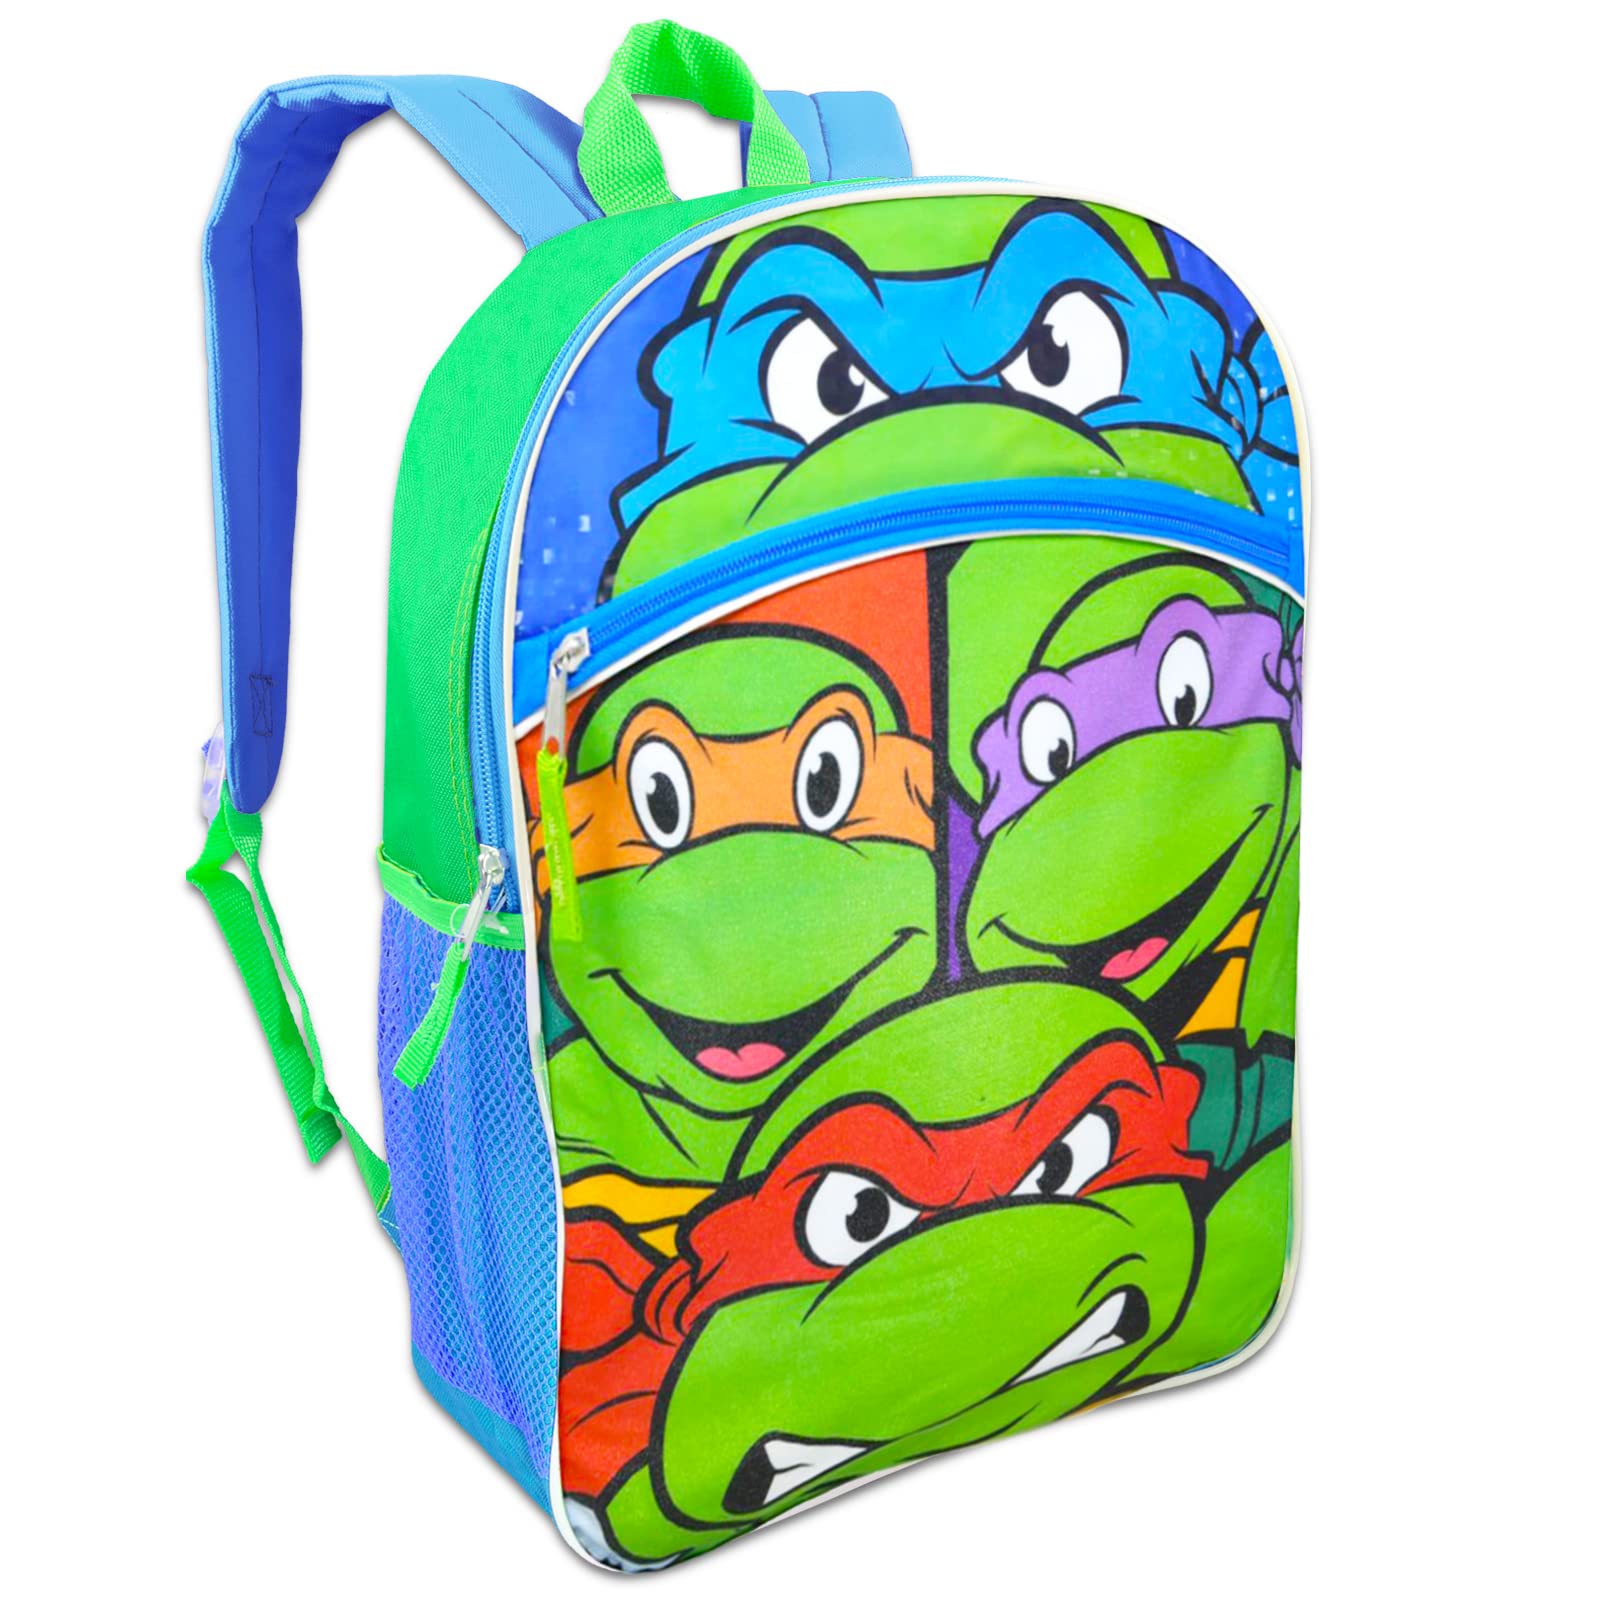 Teenage Mutant Ninja Turtles Backpack with Lunch Box - Bundle with 16” TMNT Backpack, Lunch Bag, Stickers, More | TMNT Backpack for Kids